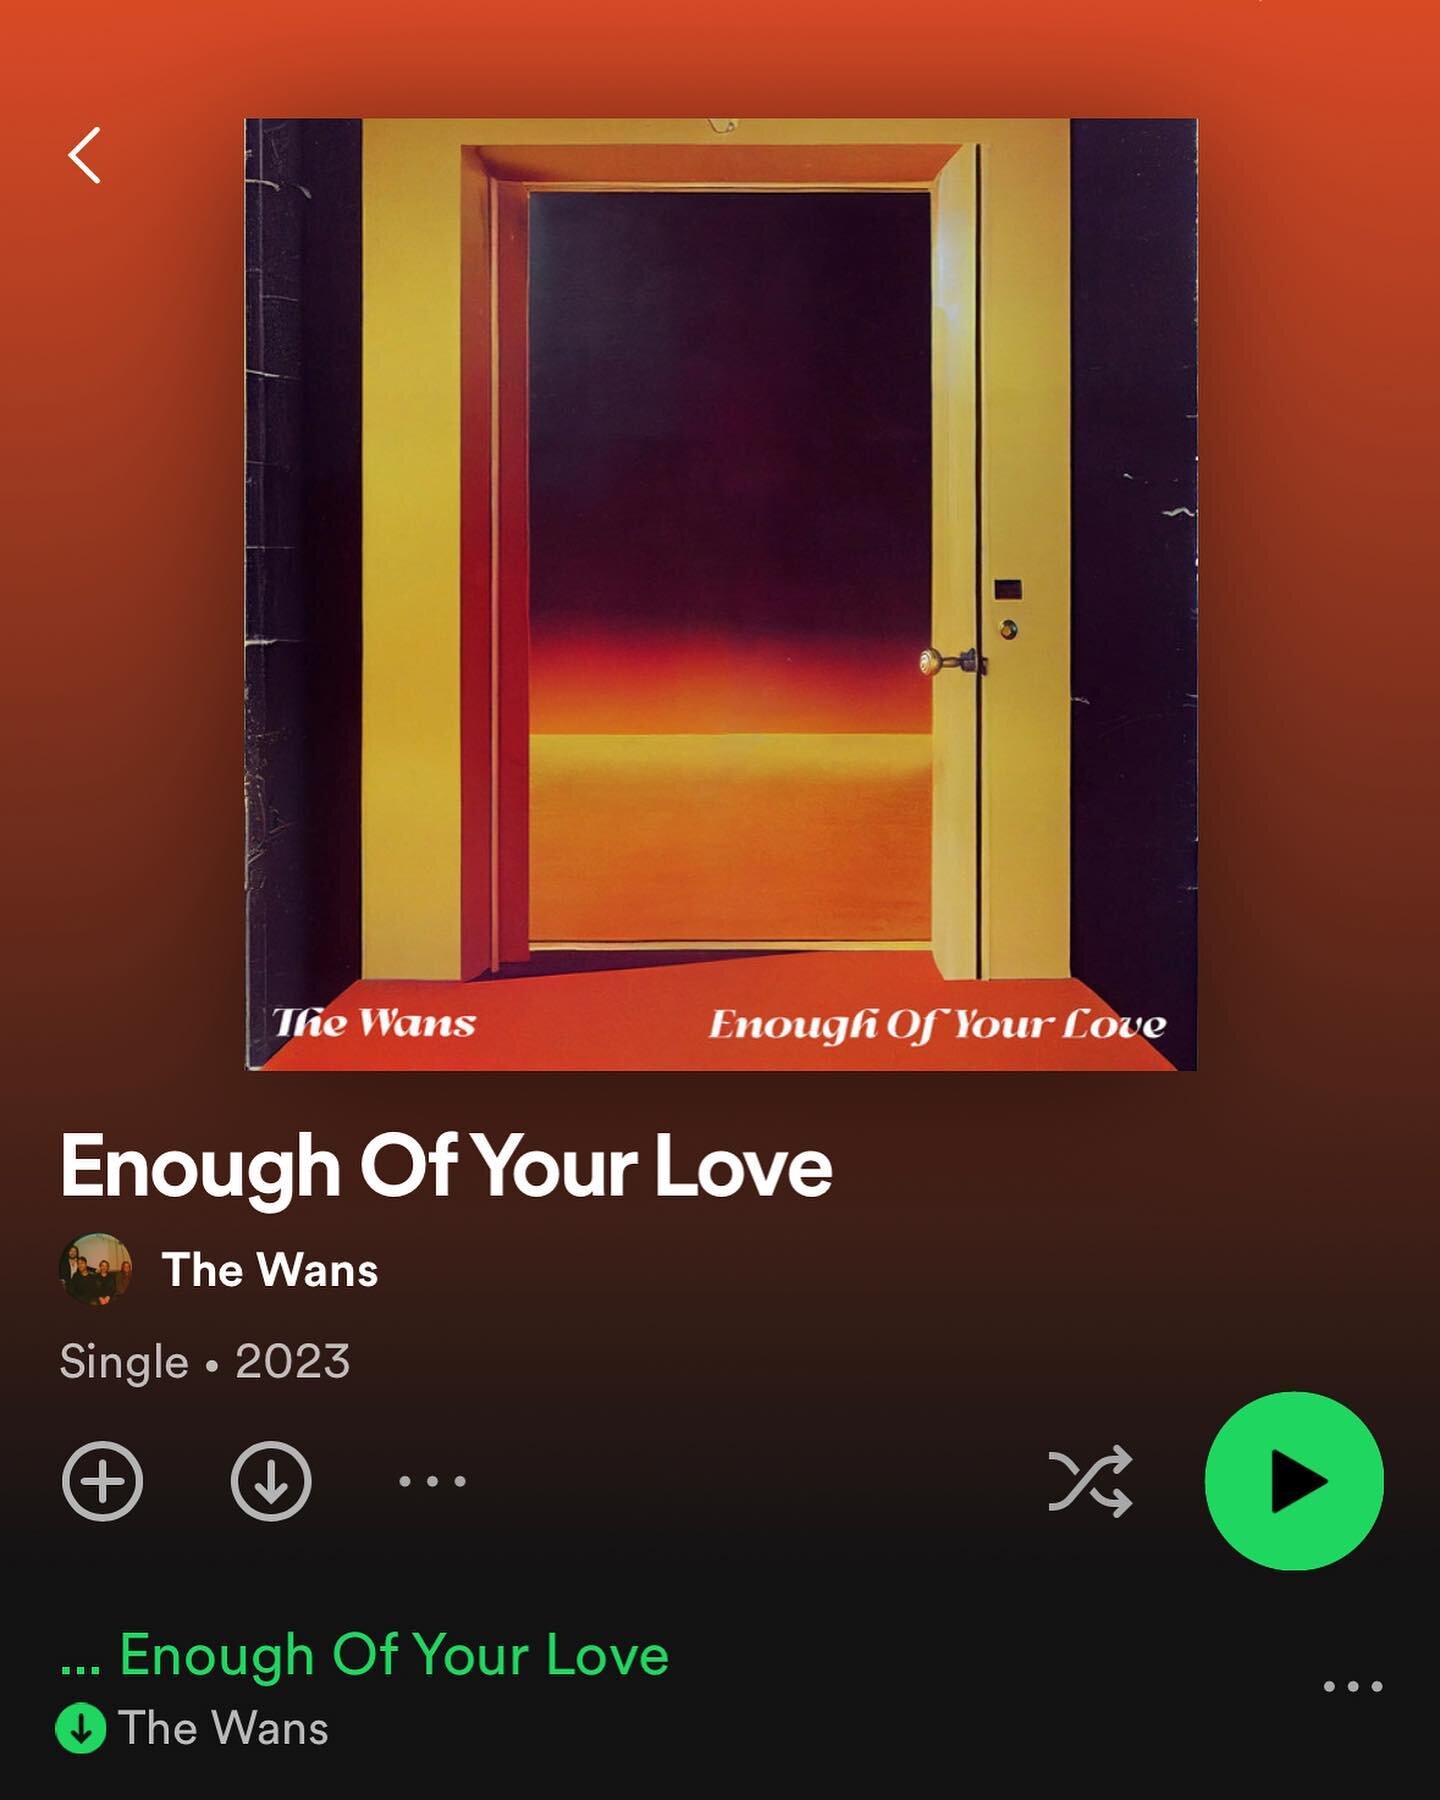 And it&rsquo;s out! Do us a favor and head over to @spotify and add &ldquo;Enough Of Your Love&rdquo; to your playlist. It all helps. We hope you enjoy this song as much as we do. Link in the bio. #thewans